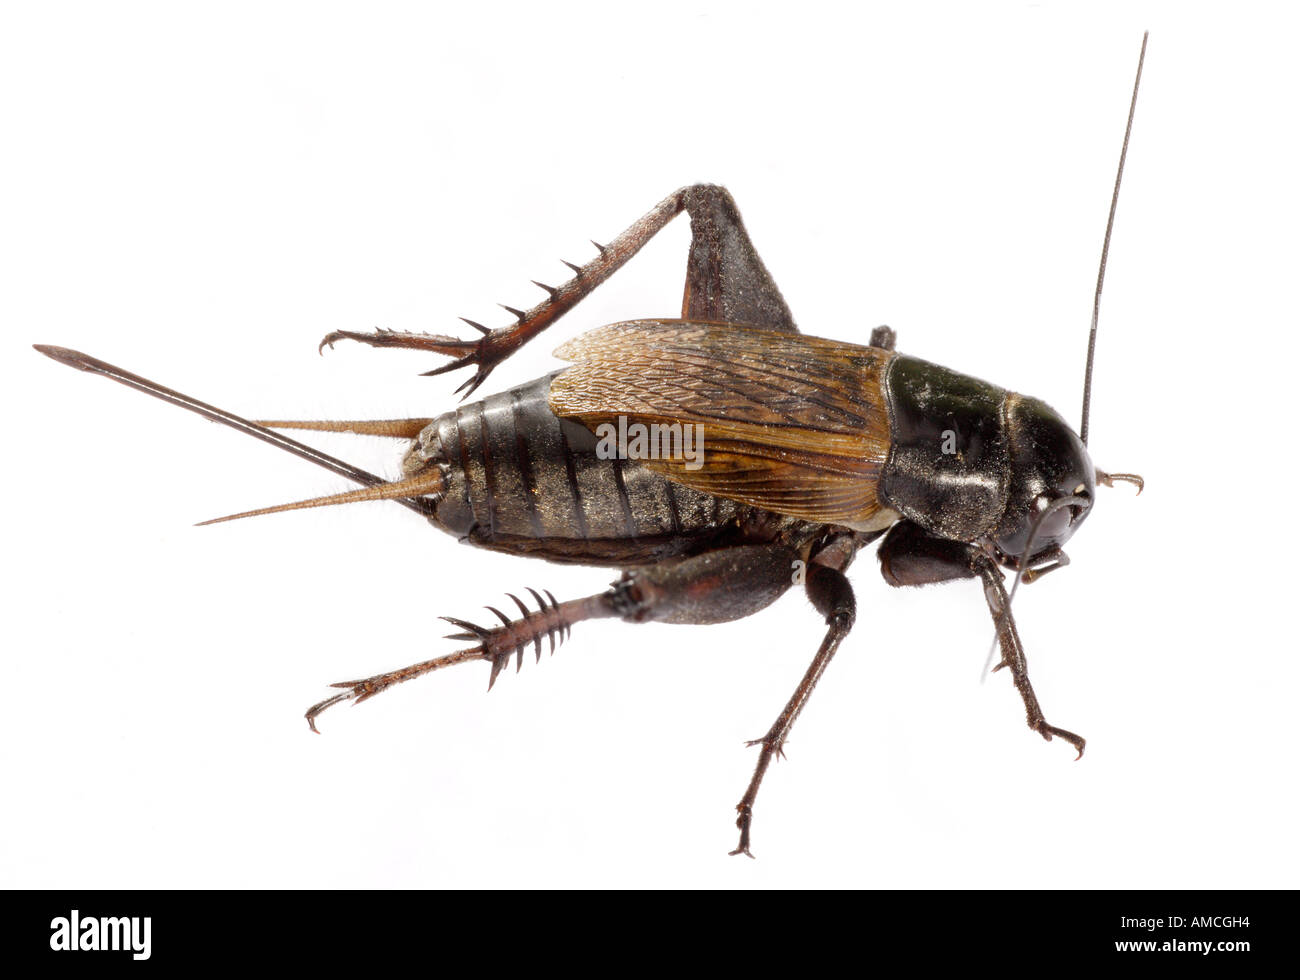 Field Cricket - Gryllus sp - Insect of order Orthoptera Stock Photo